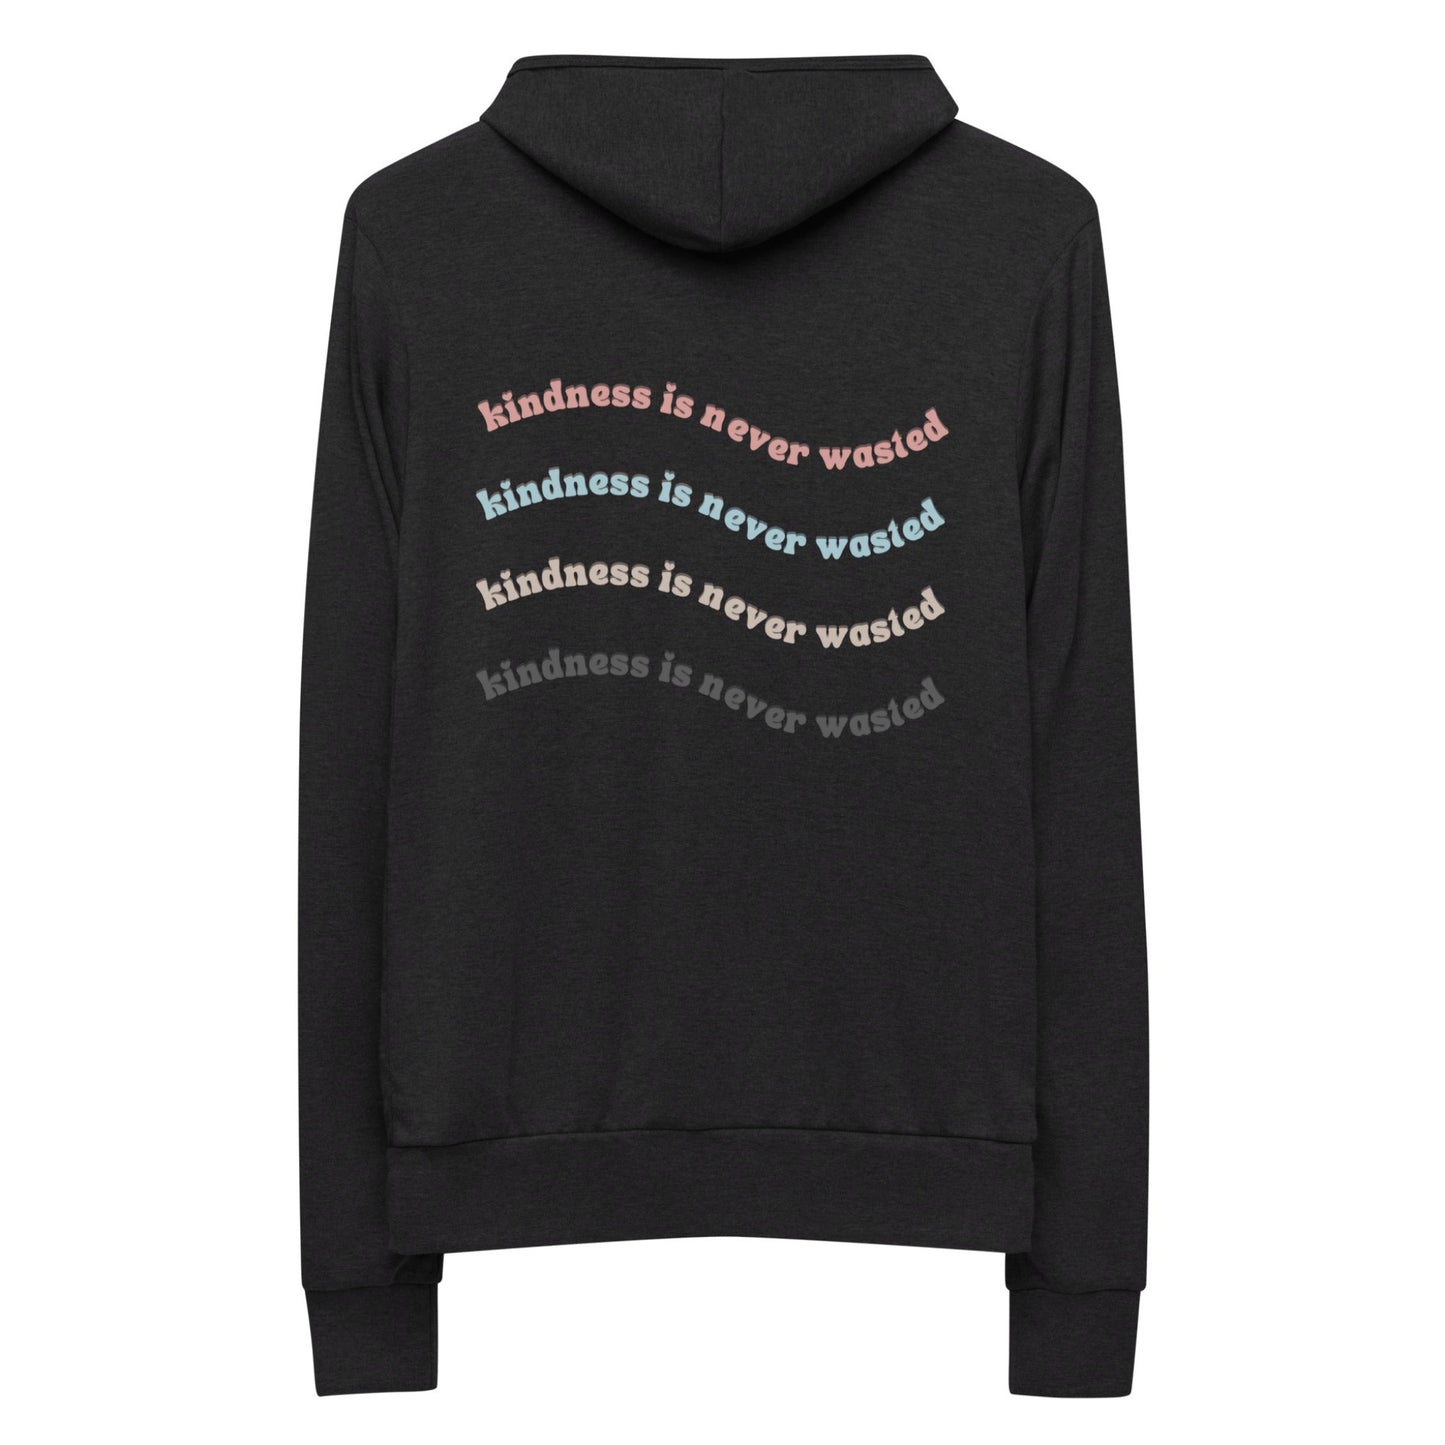 Black unisex "kidness if never wasted" hoodie with print in pink, blue, yellow, and grey. 